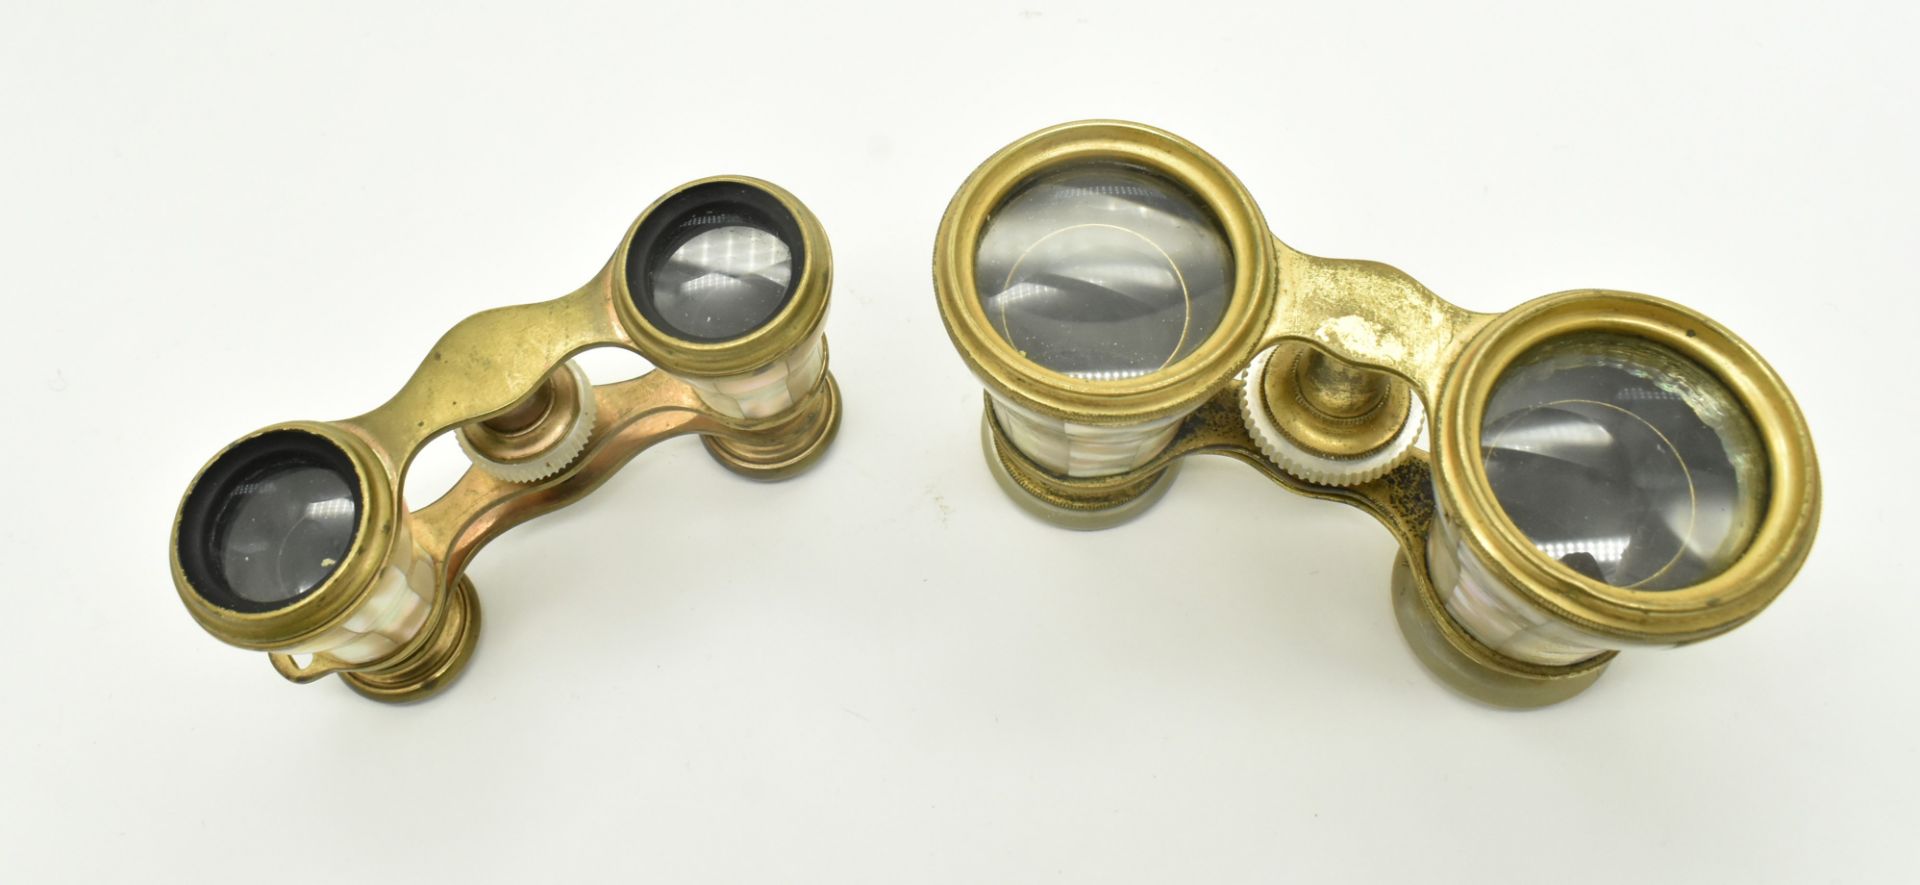 TWO PAIRS OF FRENCH MOTHER OF PEARL OPERA GLASSES - Image 2 of 7